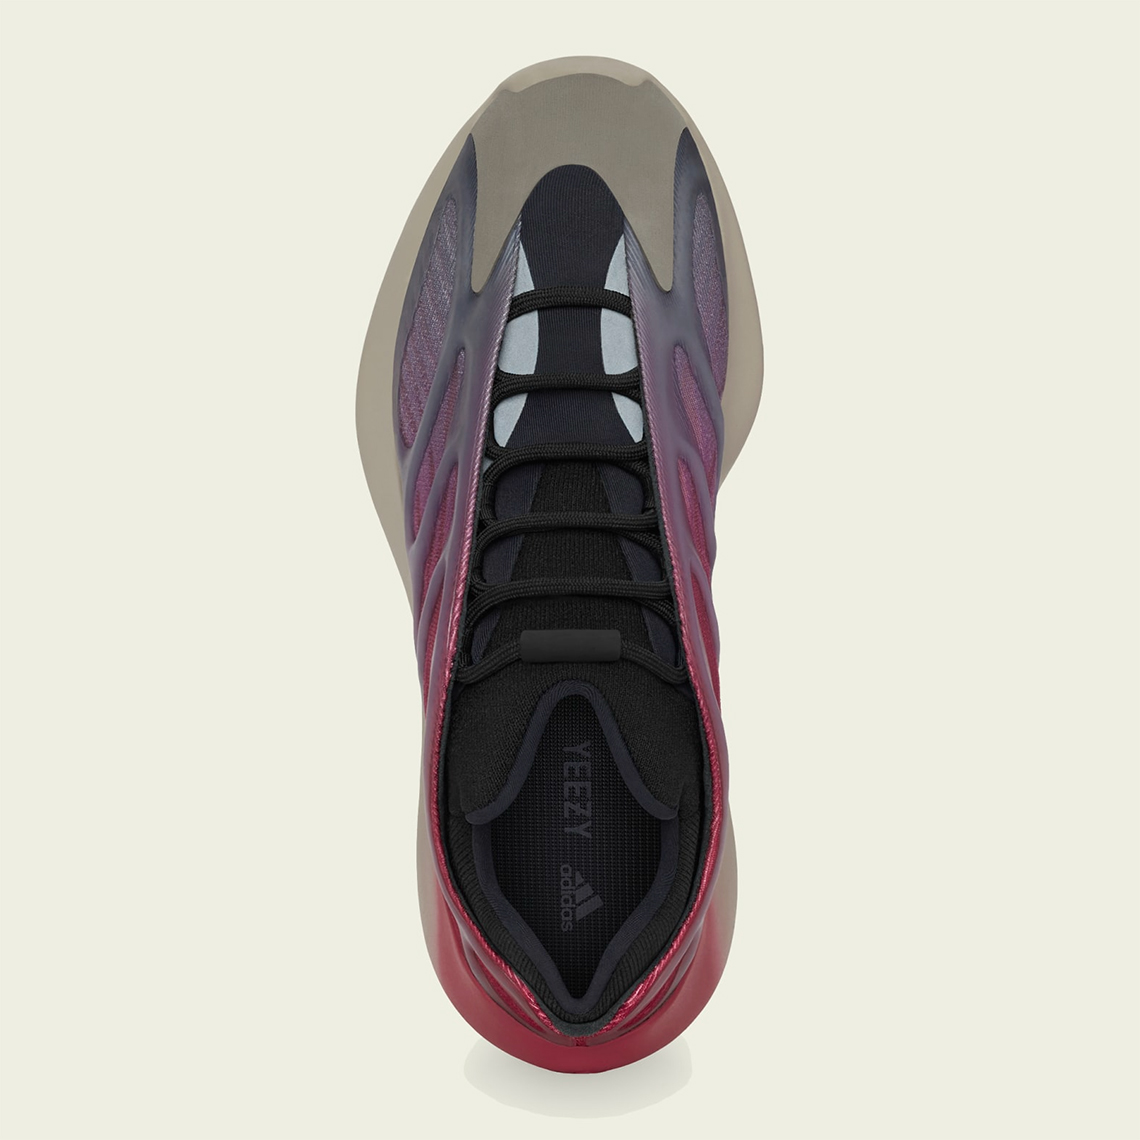 yeezy 700 v3 fade carbon store list 4